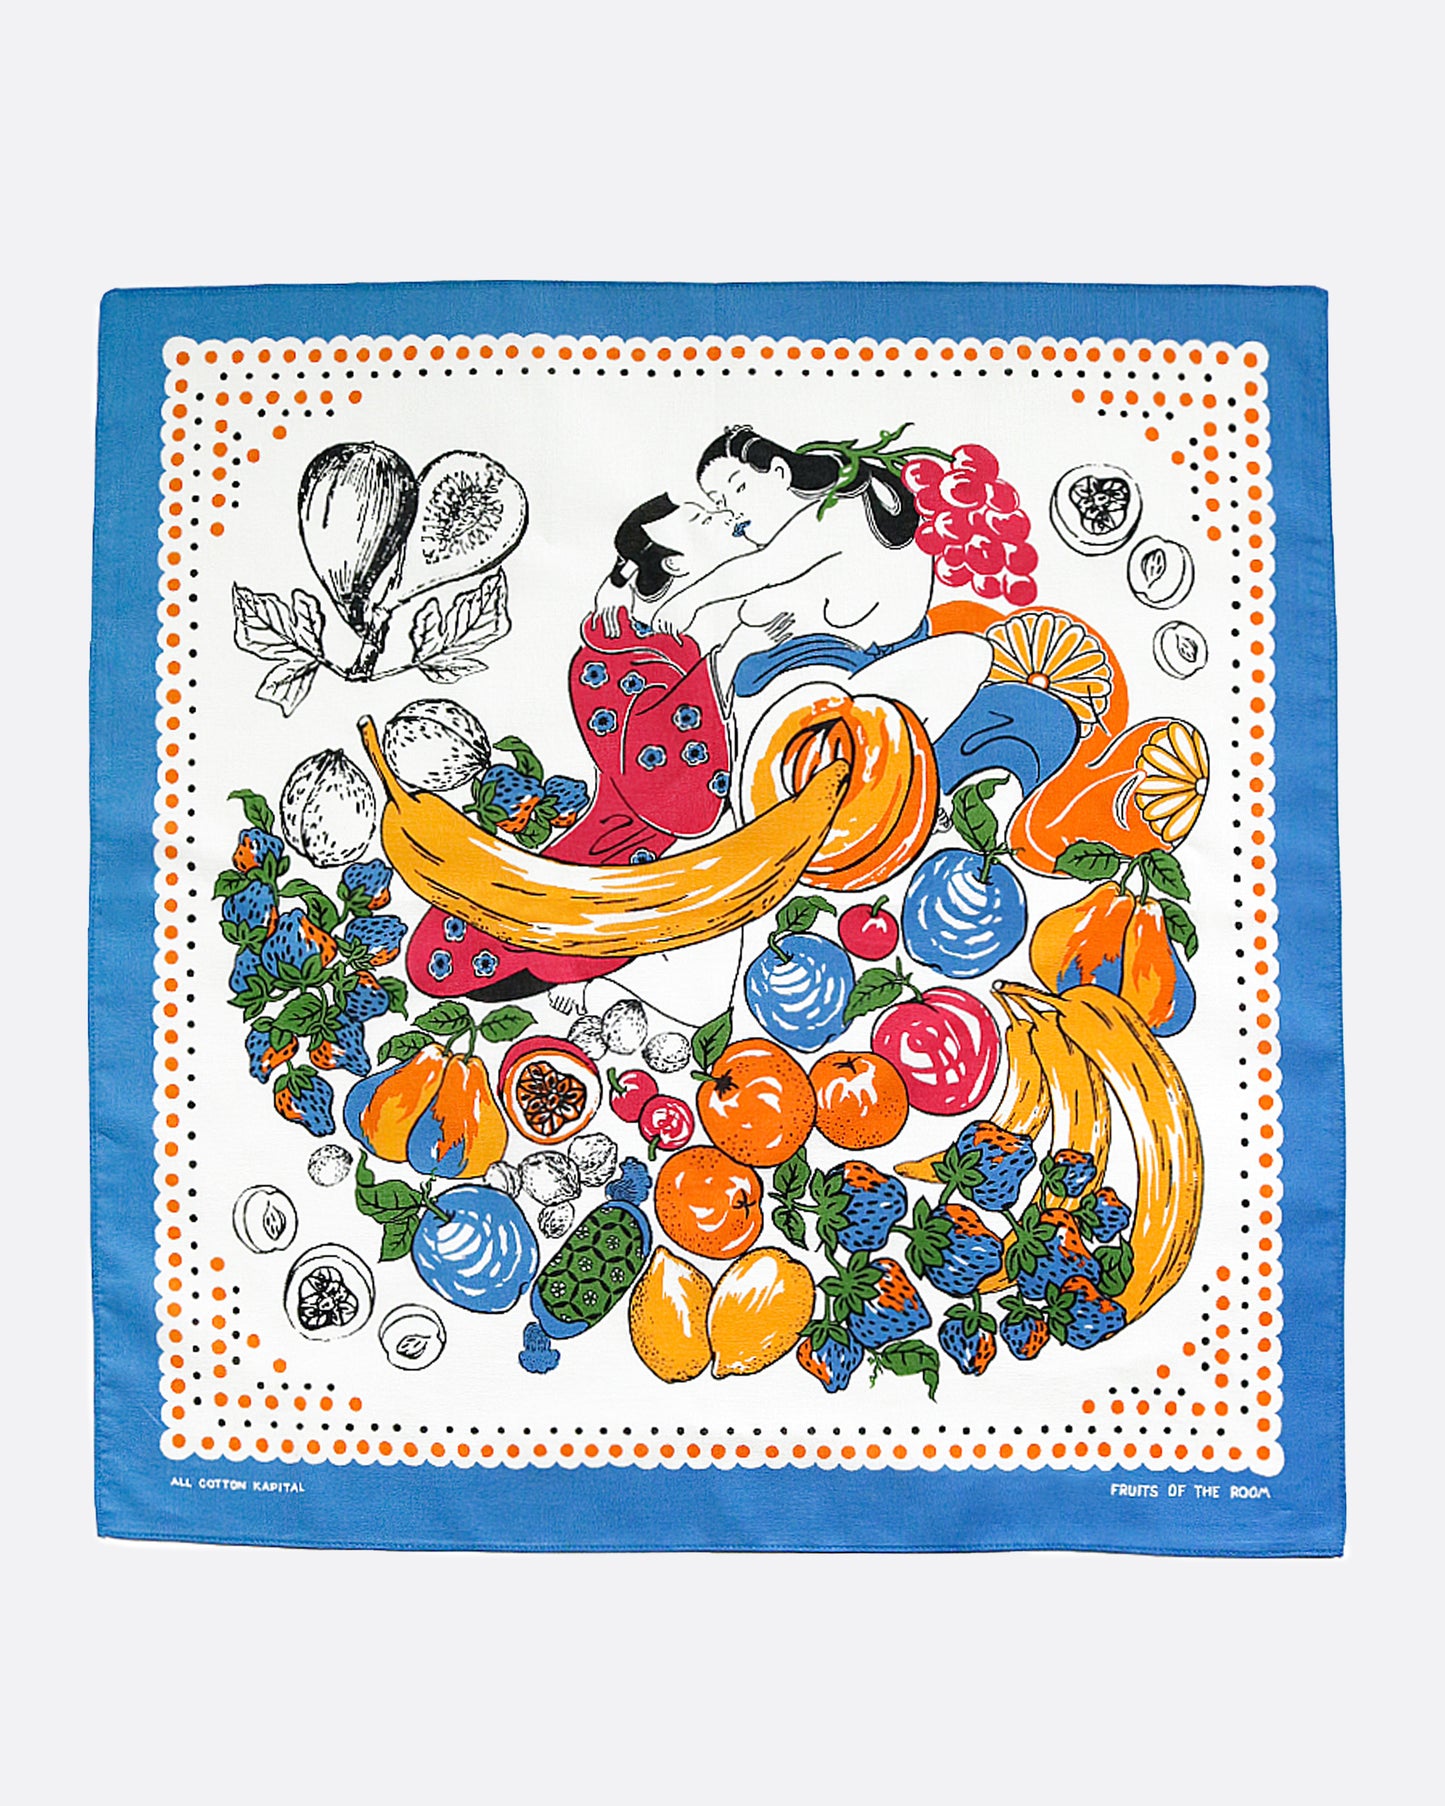 A spring painting bandana showing the "Fruits of the Room" with a colorful vintage feel.